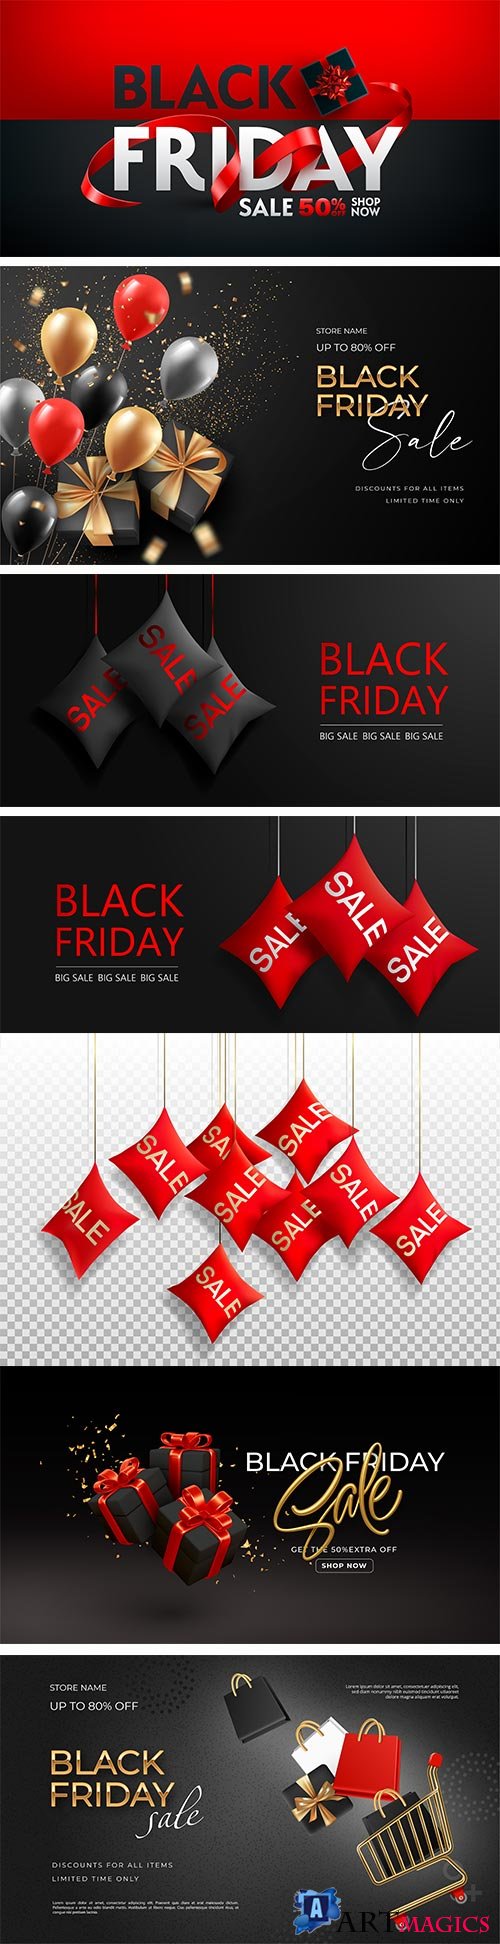 Black friday sale banner background with realistic 3d objects